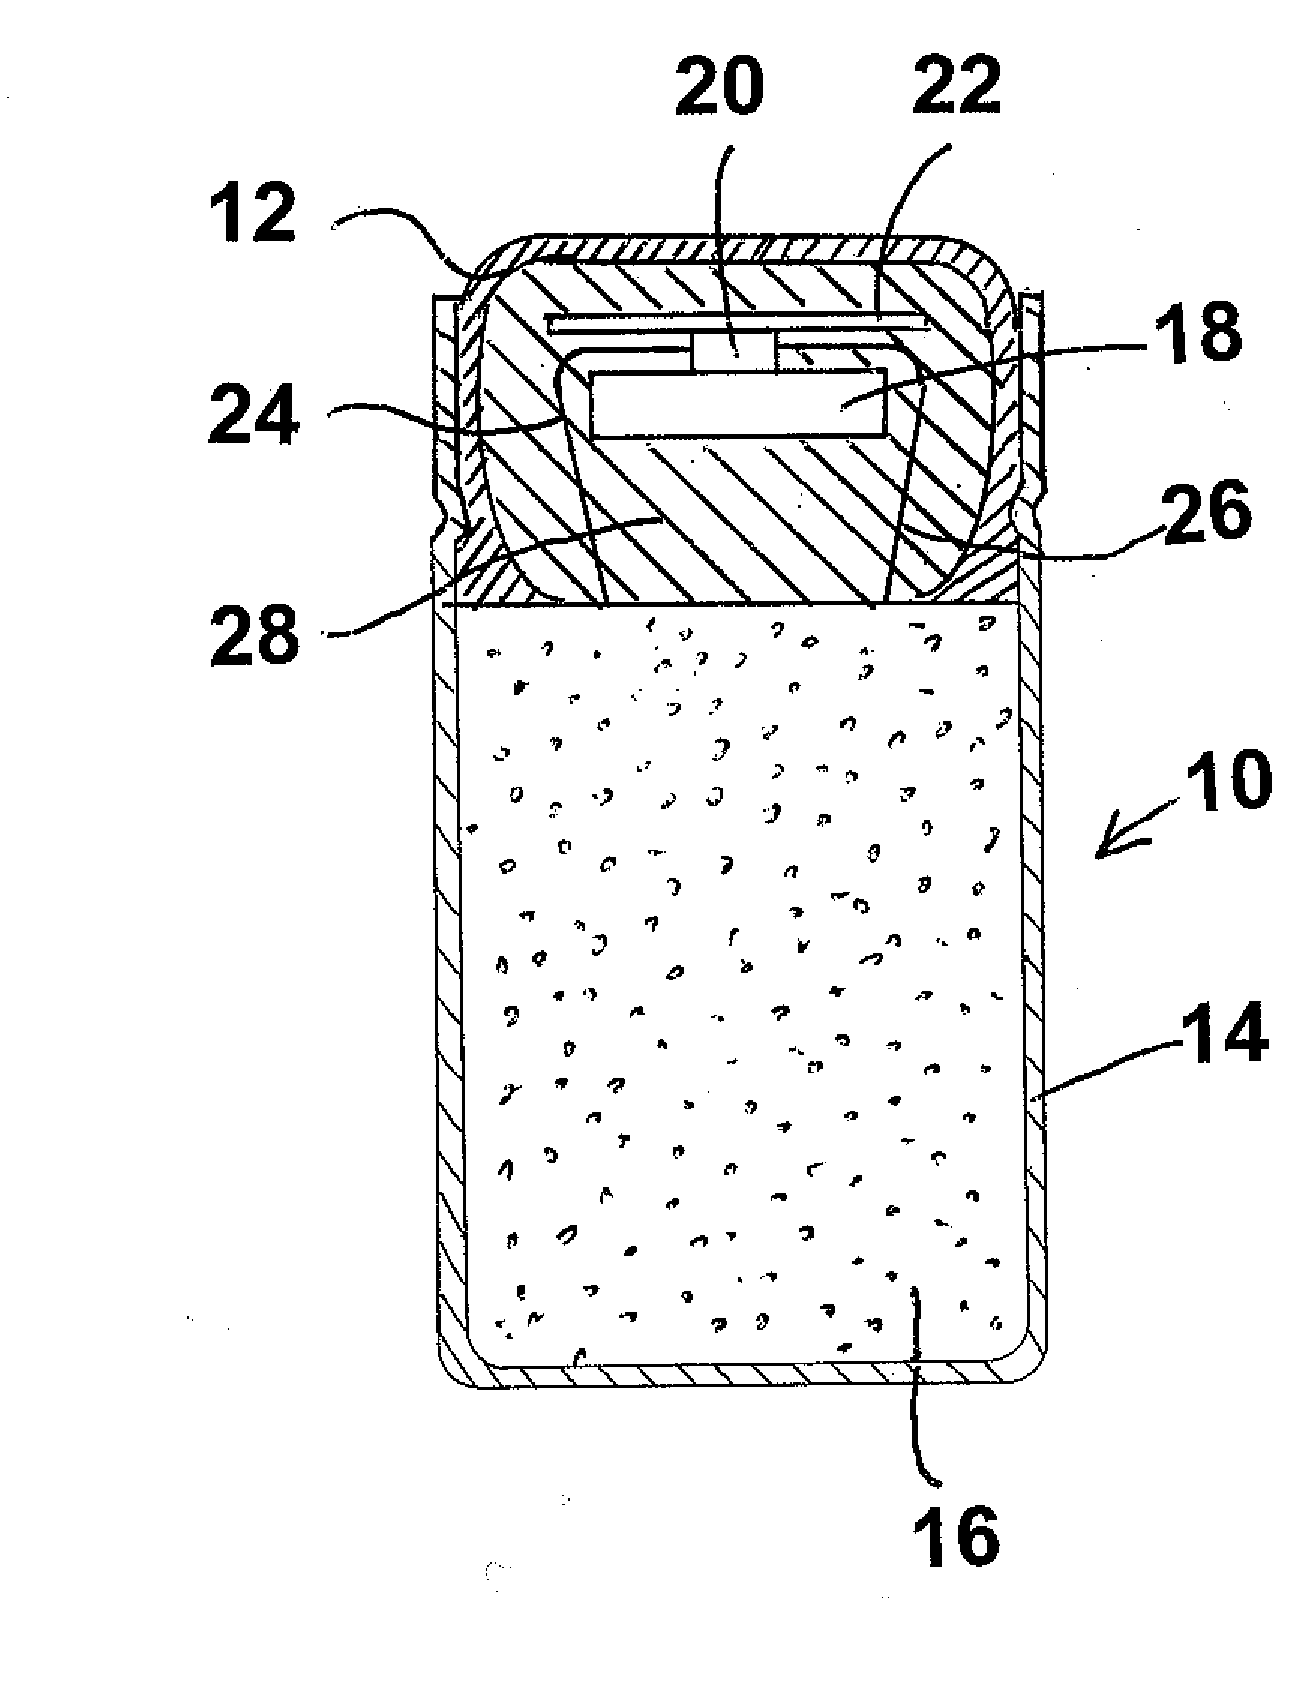 Oral drug capsule component incorporating a communication device